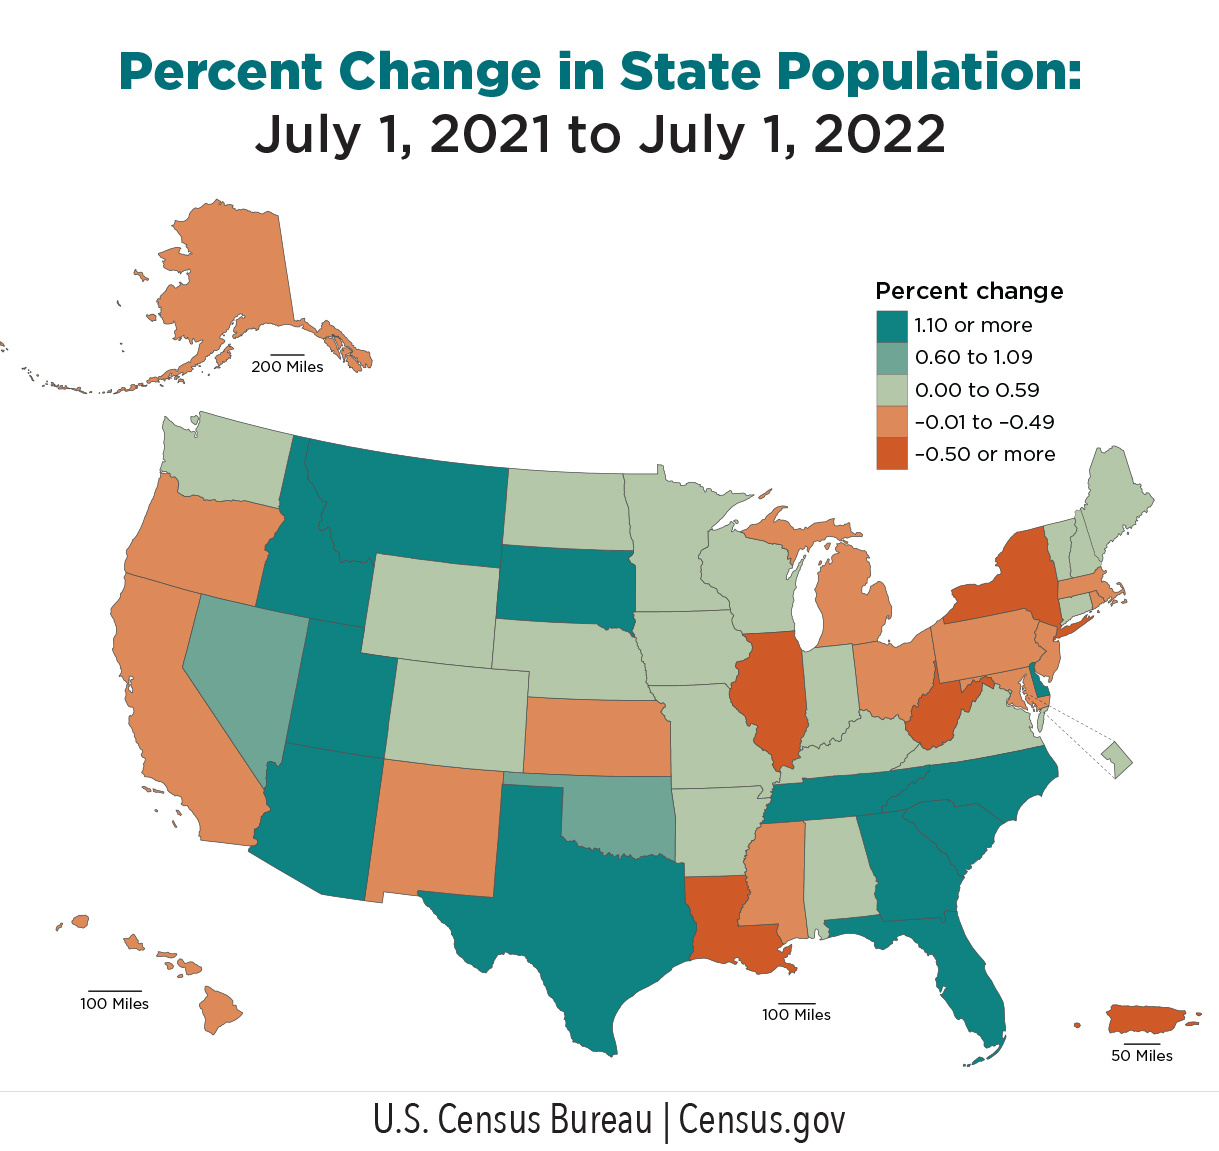 Percent Change in State Population - relocating Americans